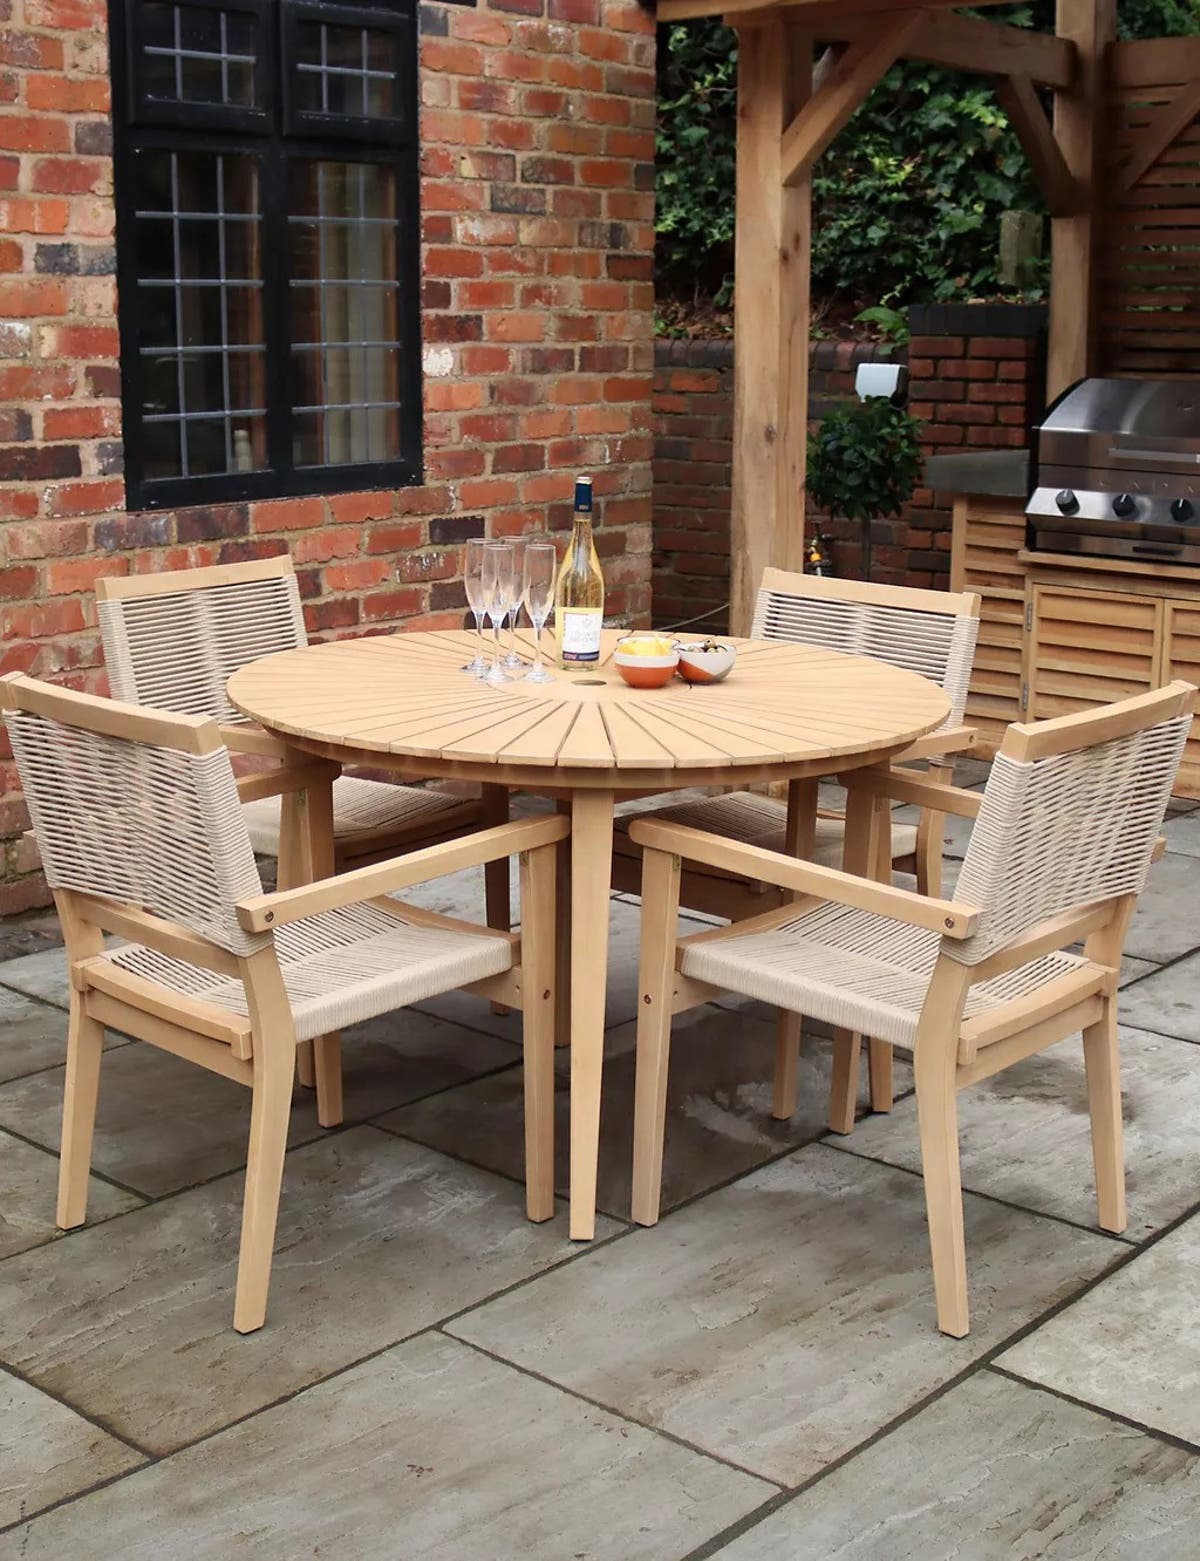 M&S tried to advertise garden furniture – they ended up bolstering rival Aldi [Video]